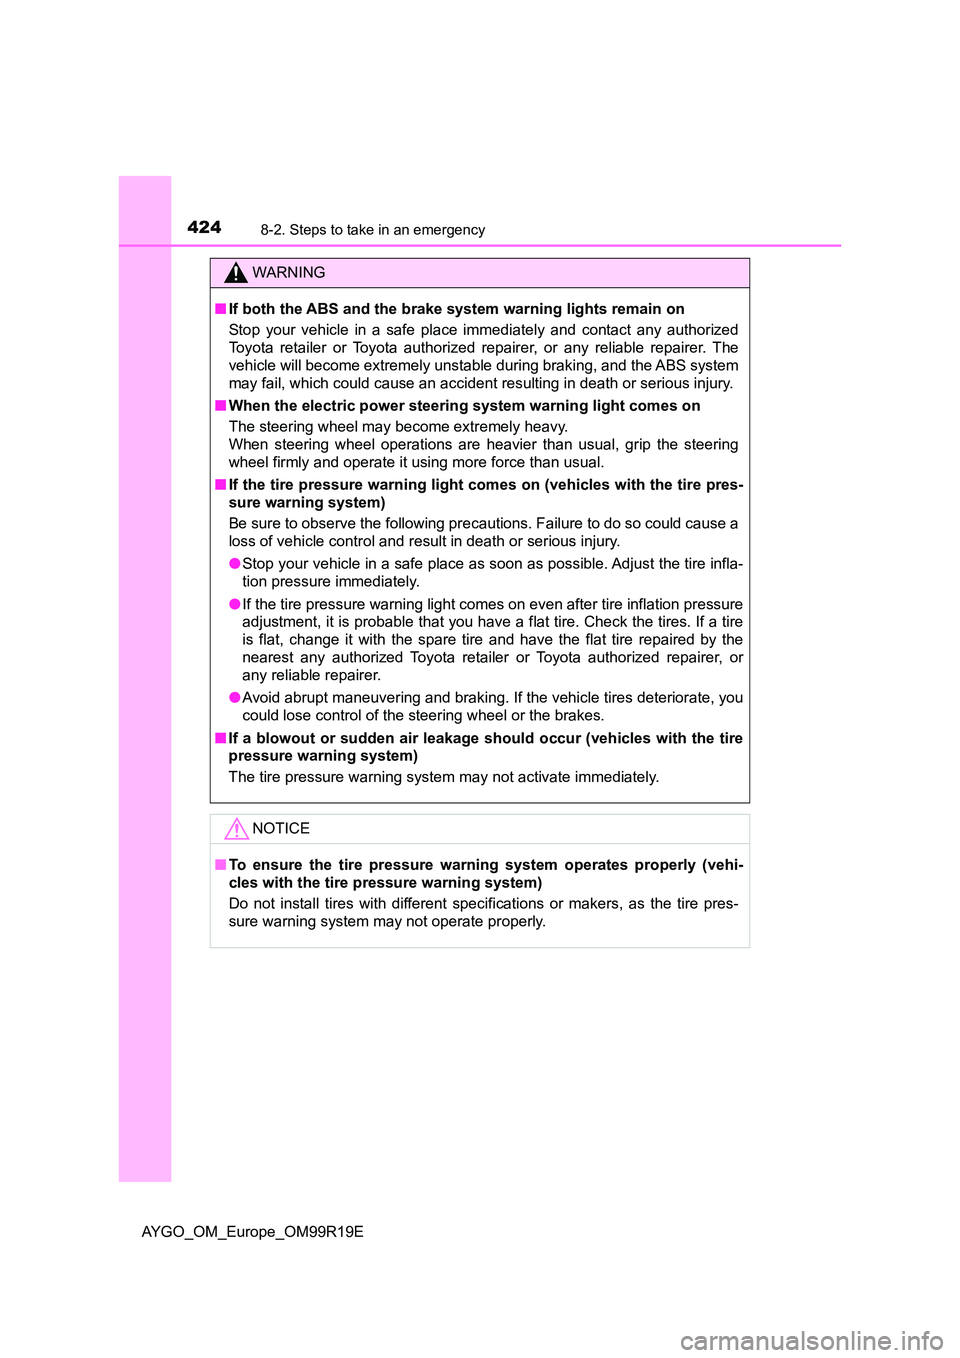 TOYOTA AYGO 2019  Owners Manual (in English) 4248-2. Steps to take in an emergency
AYGO_OM_Europe_OM99R19E
WARNING
■If both the ABS and the brake system warning lights remain on 
Stop your vehicle in a safe place immediately and contact any au